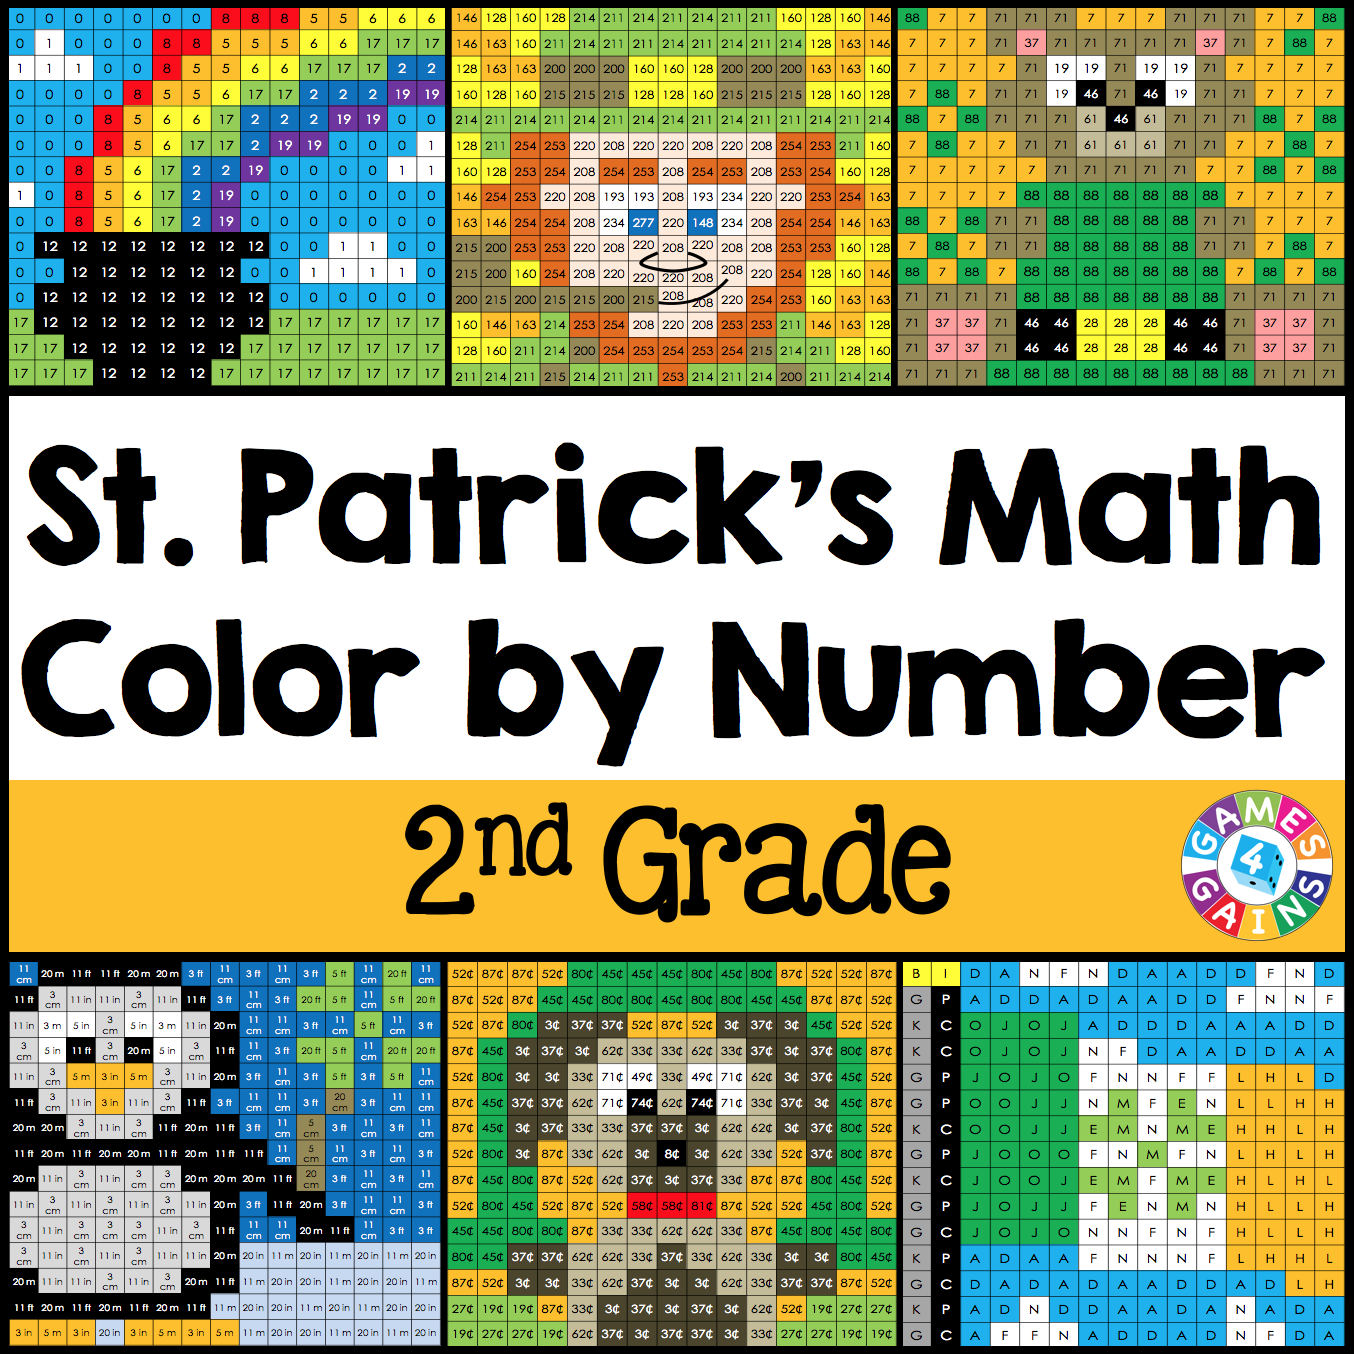 St. Patrick's Day Math 2nd Grade Cover.png